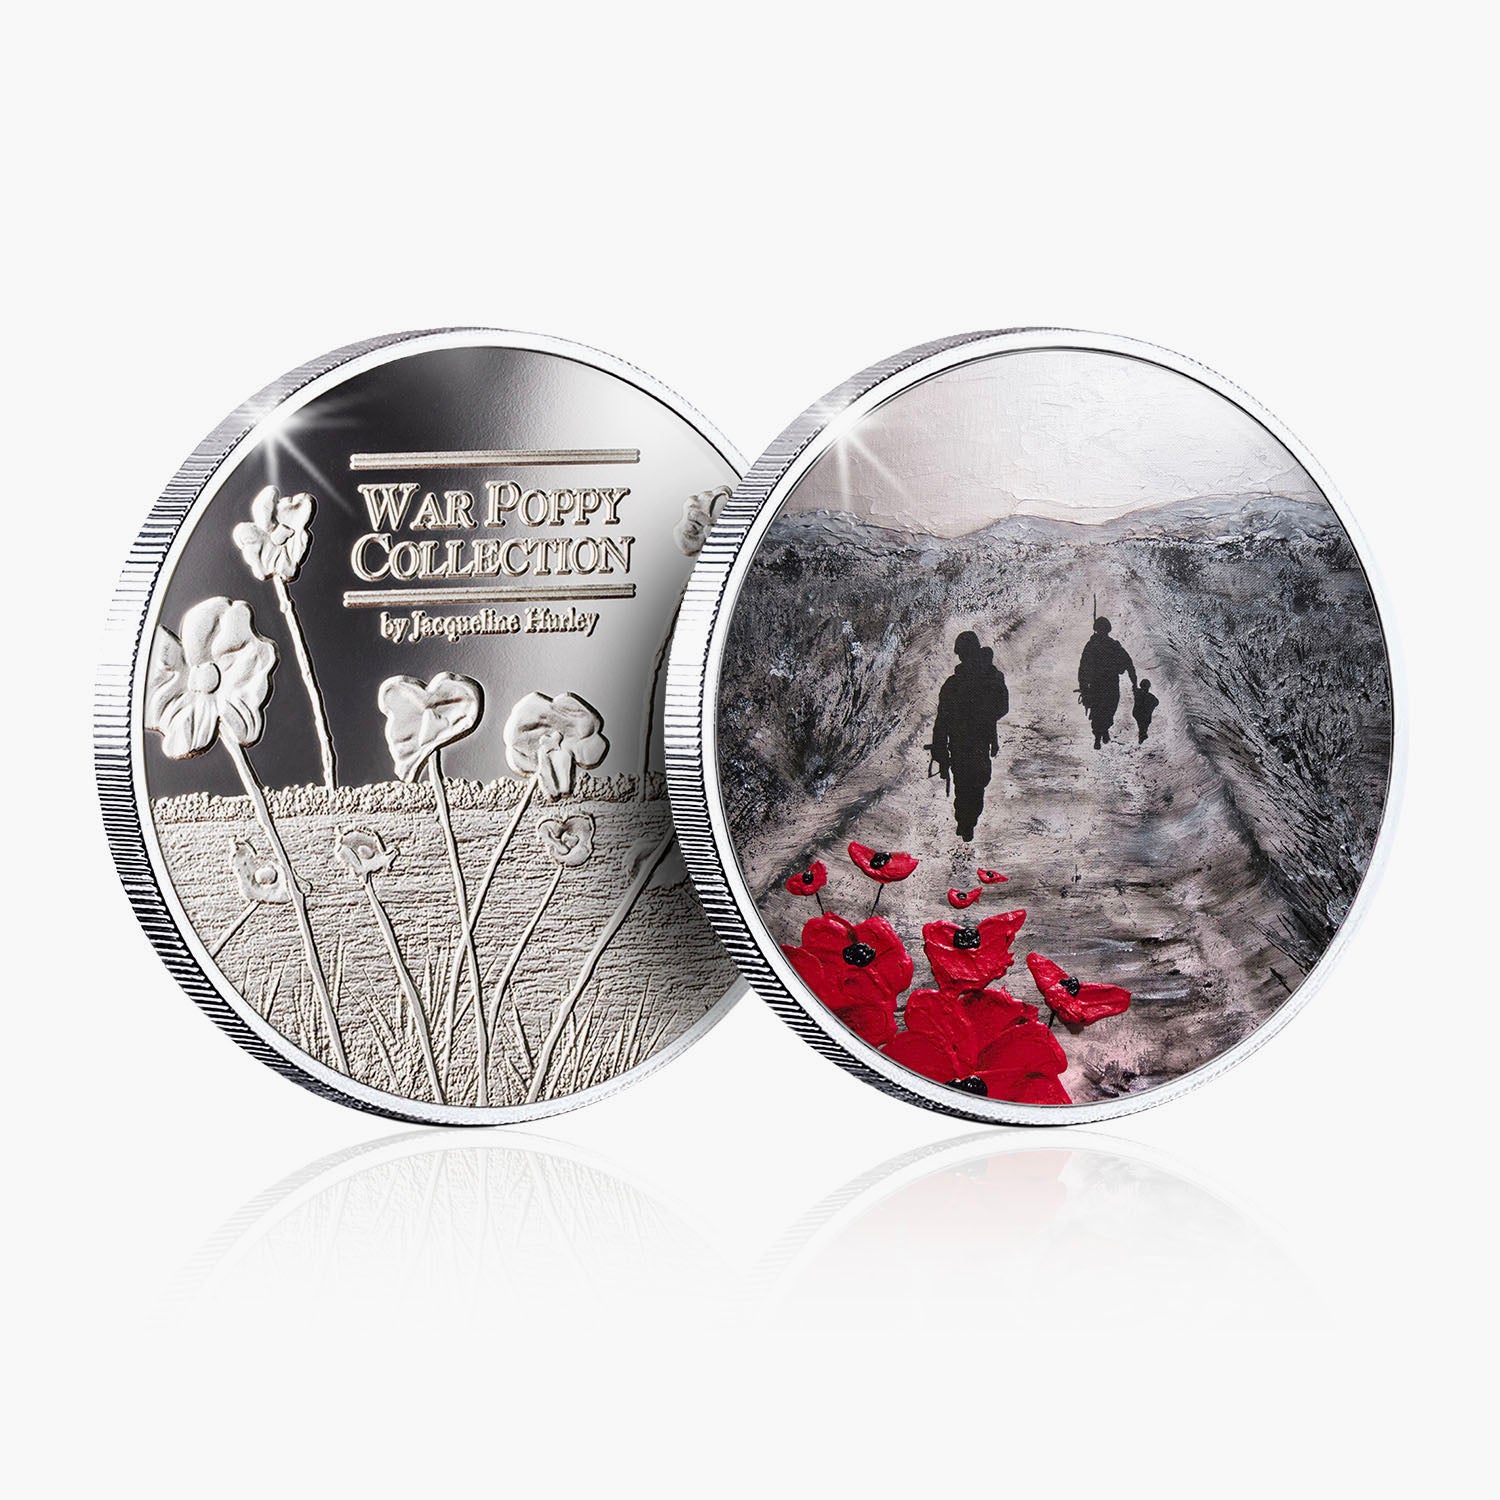 In The Hands Of Hope Silver-Plated Commemorative